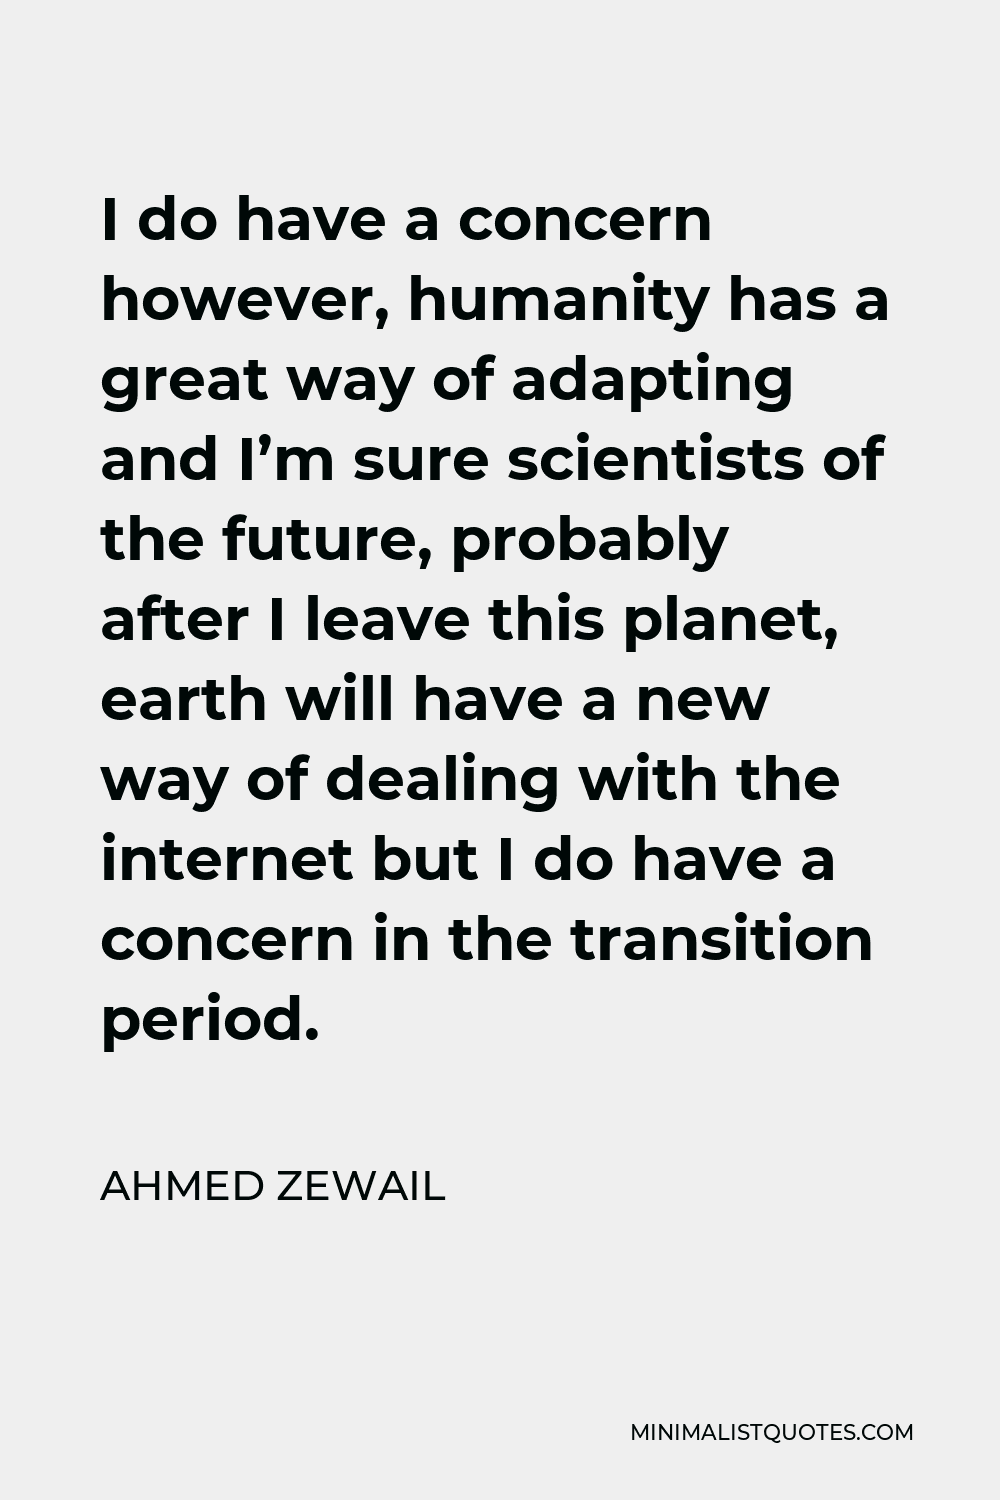 Ahmed Zewail Quote - I do have a concern however, humanity has a great way of adapting and I’m sure scientists of the future, probably after I leave this planet, earth will have a new way of dealing with the internet but I do have a concern in the transition period.